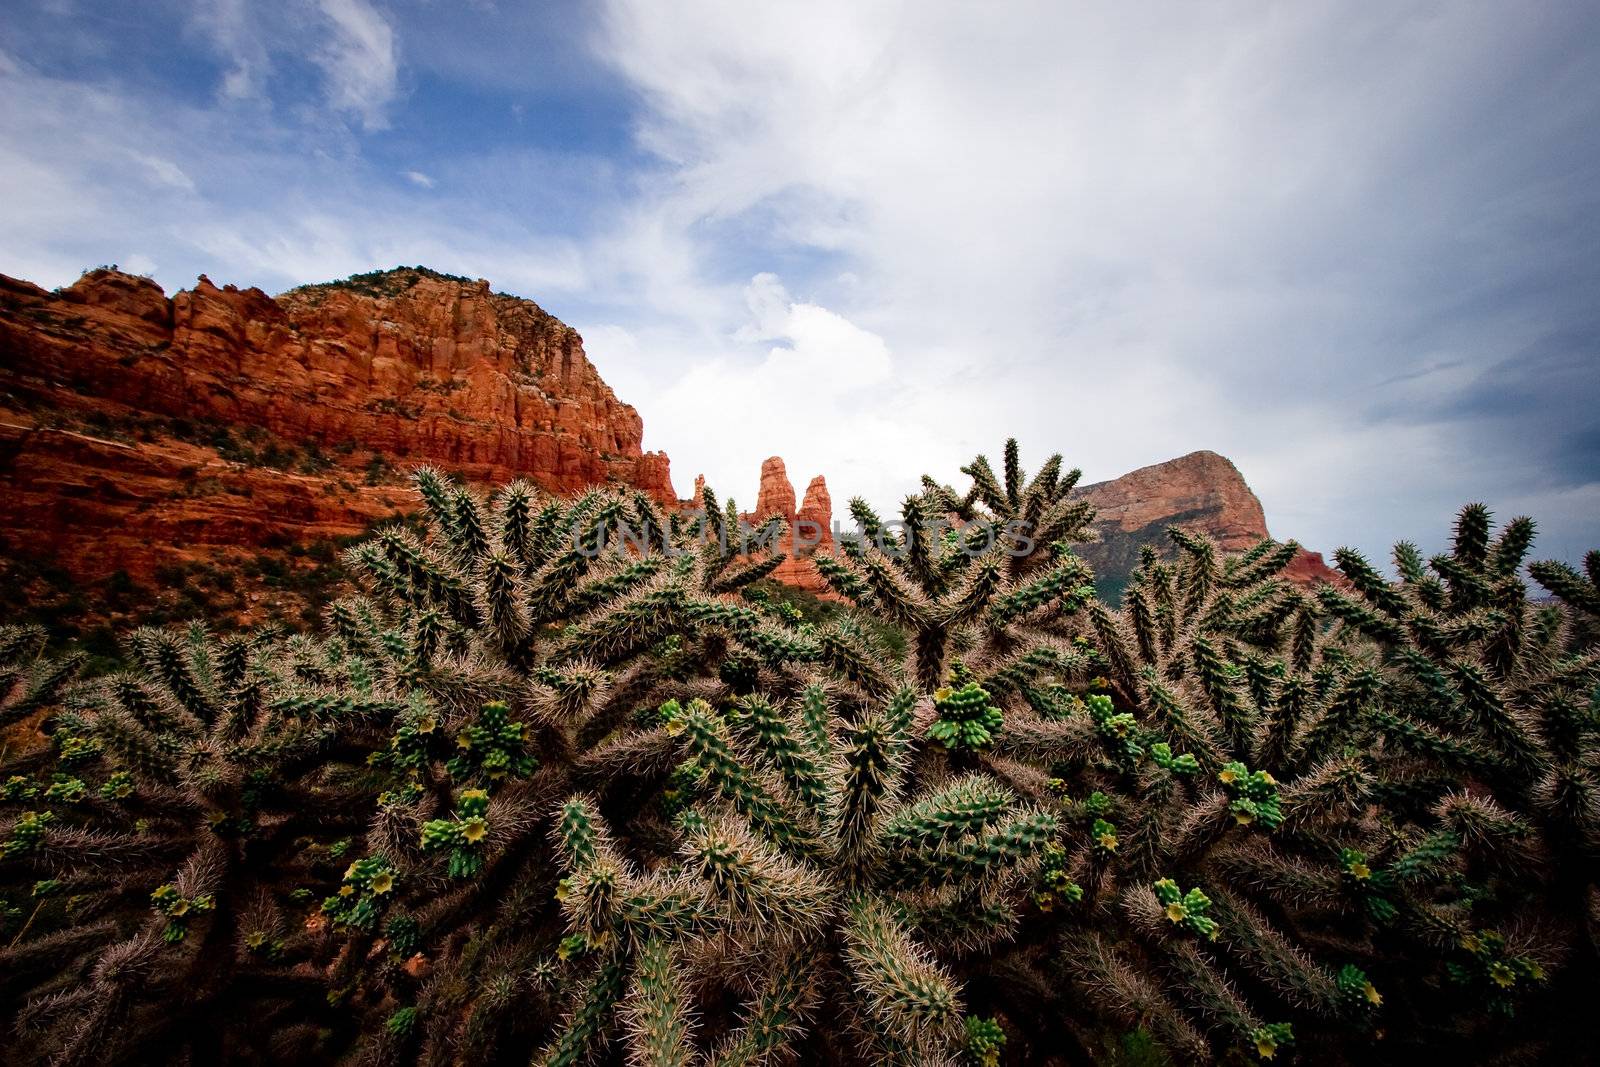 Close up of cactus against the red rocks of the Sedona mountains